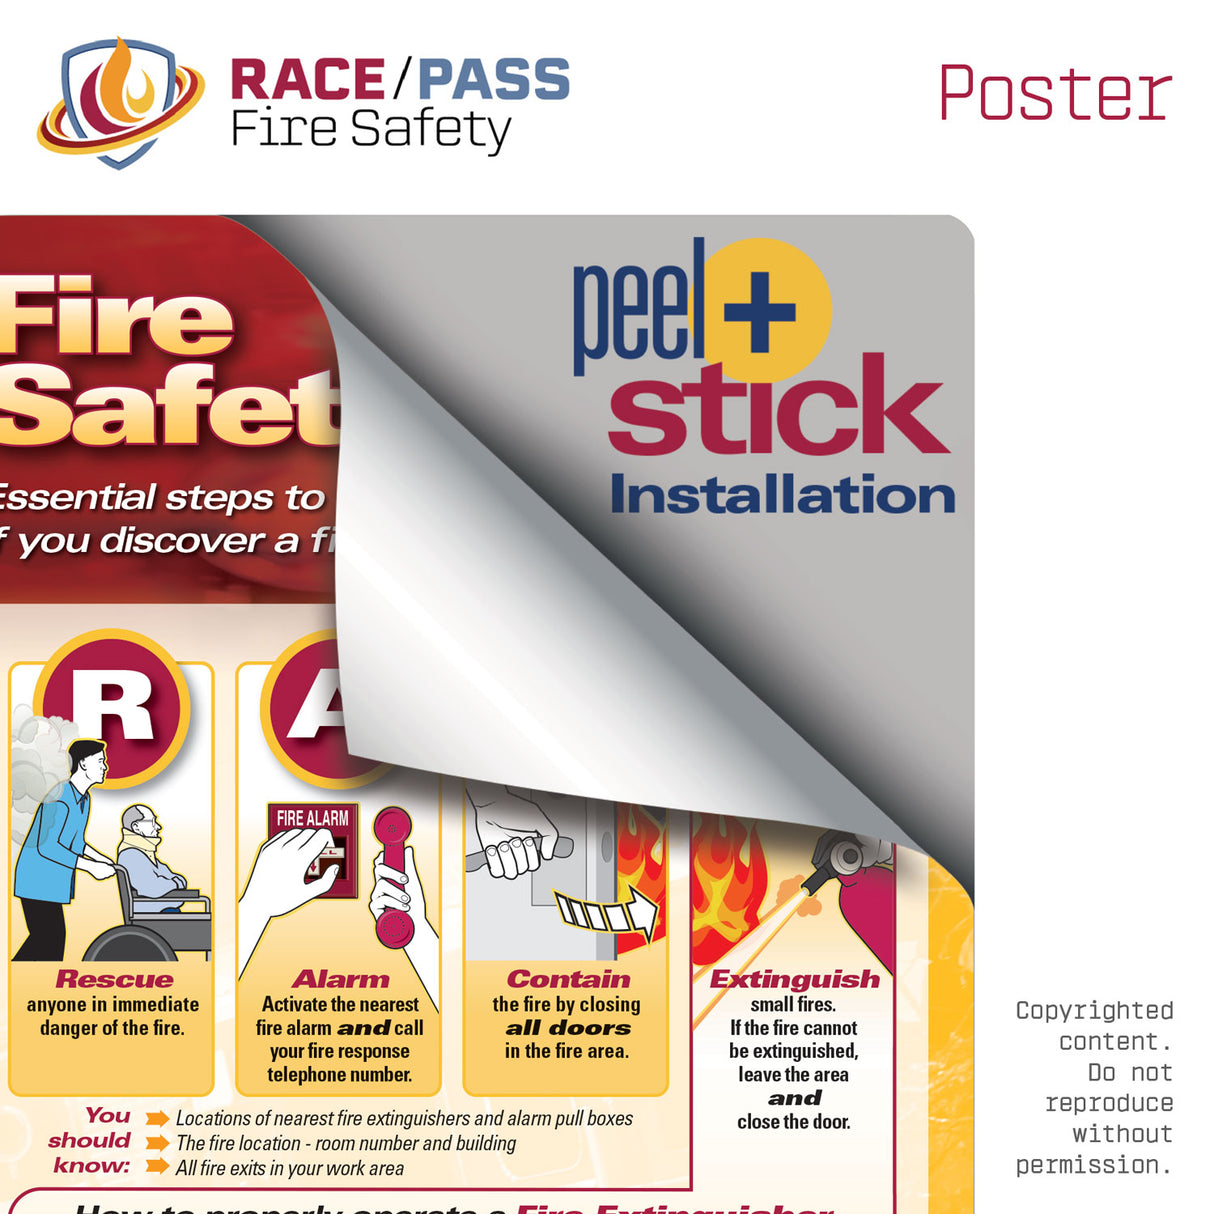 RACE/PASS Fire Safety Poster